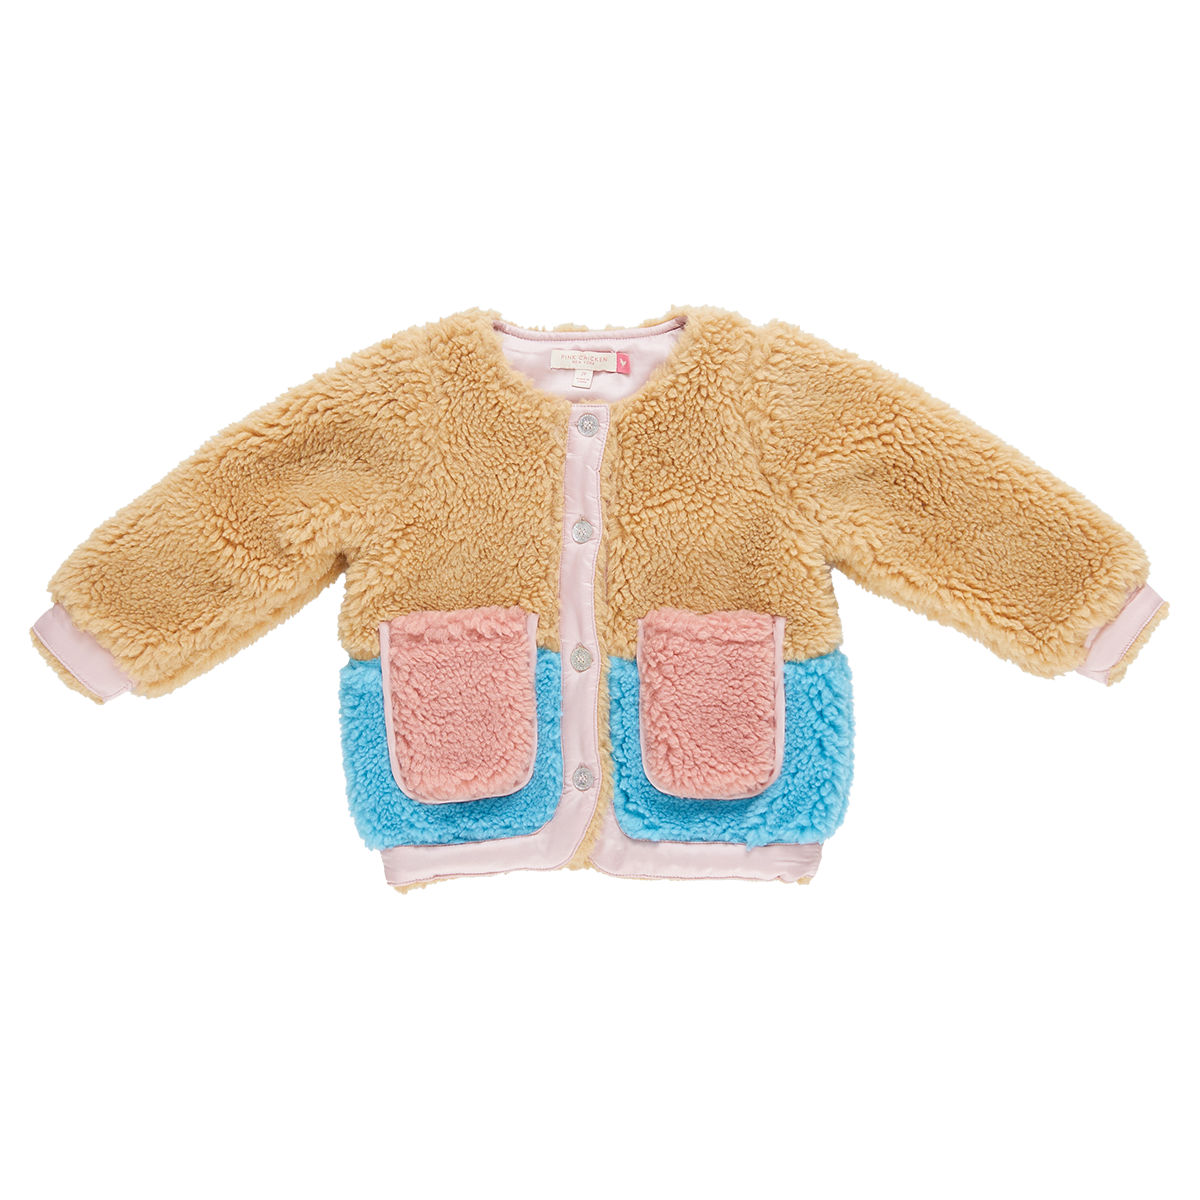 coloblock teddy coat with brown, blue and pink patches and sparkle buttons